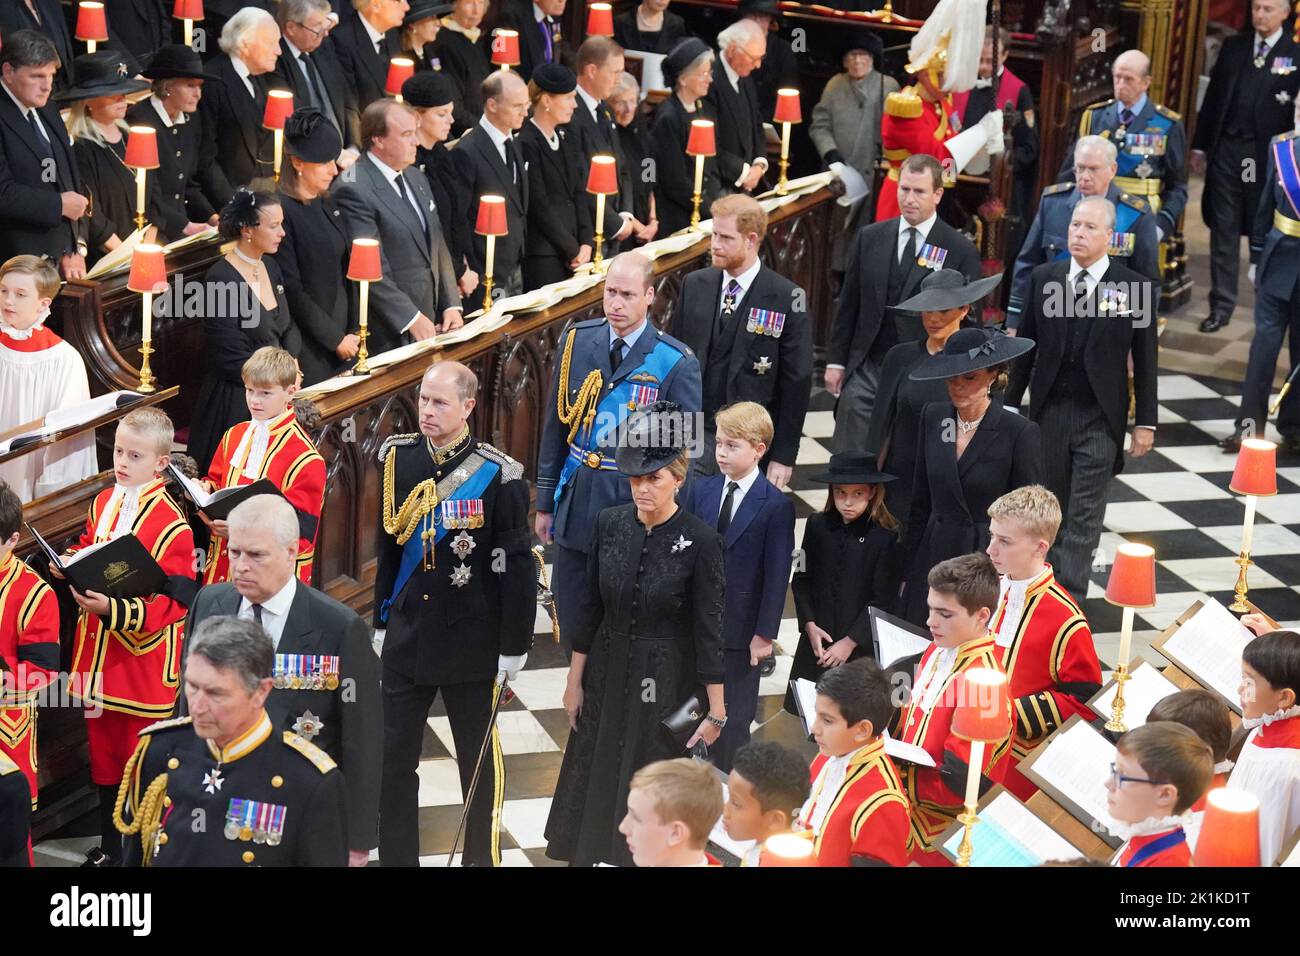 Members of the royal family (left to right, from front) the Duke of York, the Earl of Wessex, the Countess of Wessex, the Prince of Wales, Prince George, Princess Charlotte, the Princess of Wales, the Duke of Sussex, the Duchess of Sussex, Peter Phillips, the Earl of Snowdon, the Duke of Gloucester and the DUke of Kent arriving at the State Funeral of Queen Elizabeth II, held at Westminster Abbey, London. Picture date: Monday September 19, 2022. Stock Photo